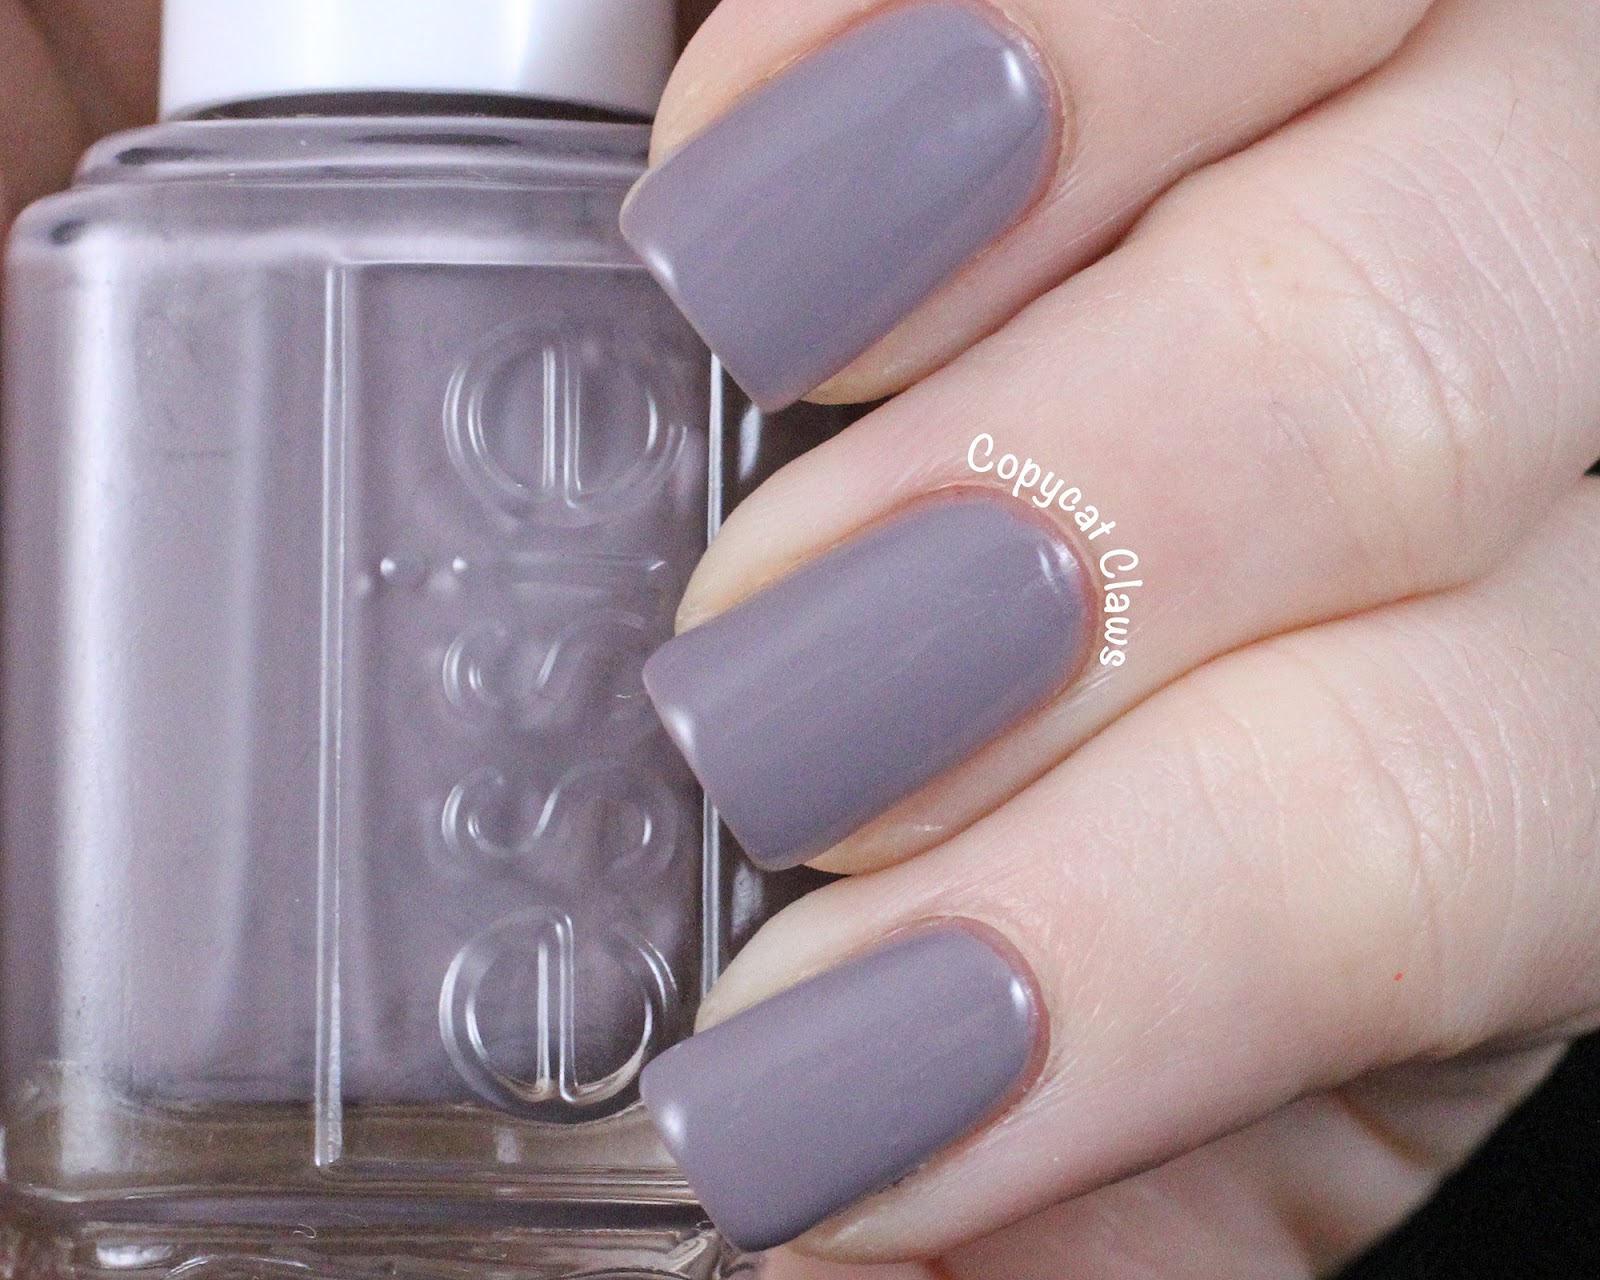 Essie Nail Polish in "Chinchilly" - wide 4